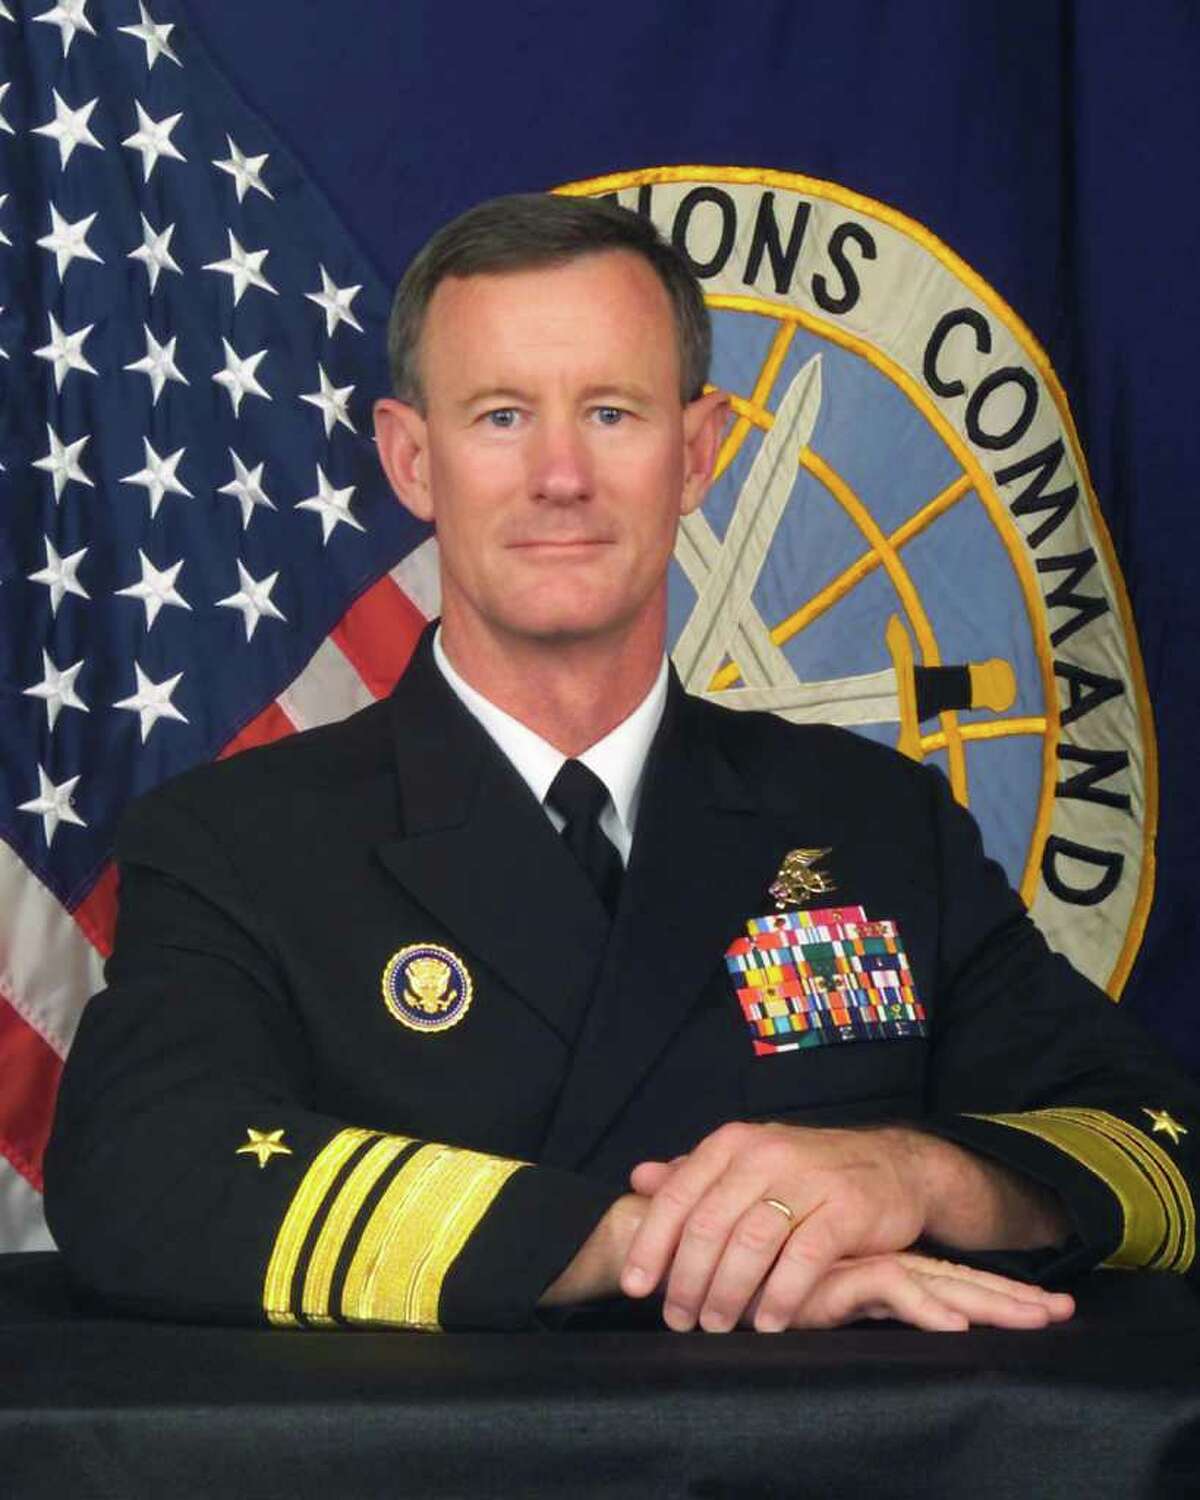 A reader points out a San Antonio native, Navy Adm. William McRaven, was named the Dallas Morning News’ Texan of the Year.  McRaven led the SEALs team that killed terrorist Osama bin Laden.